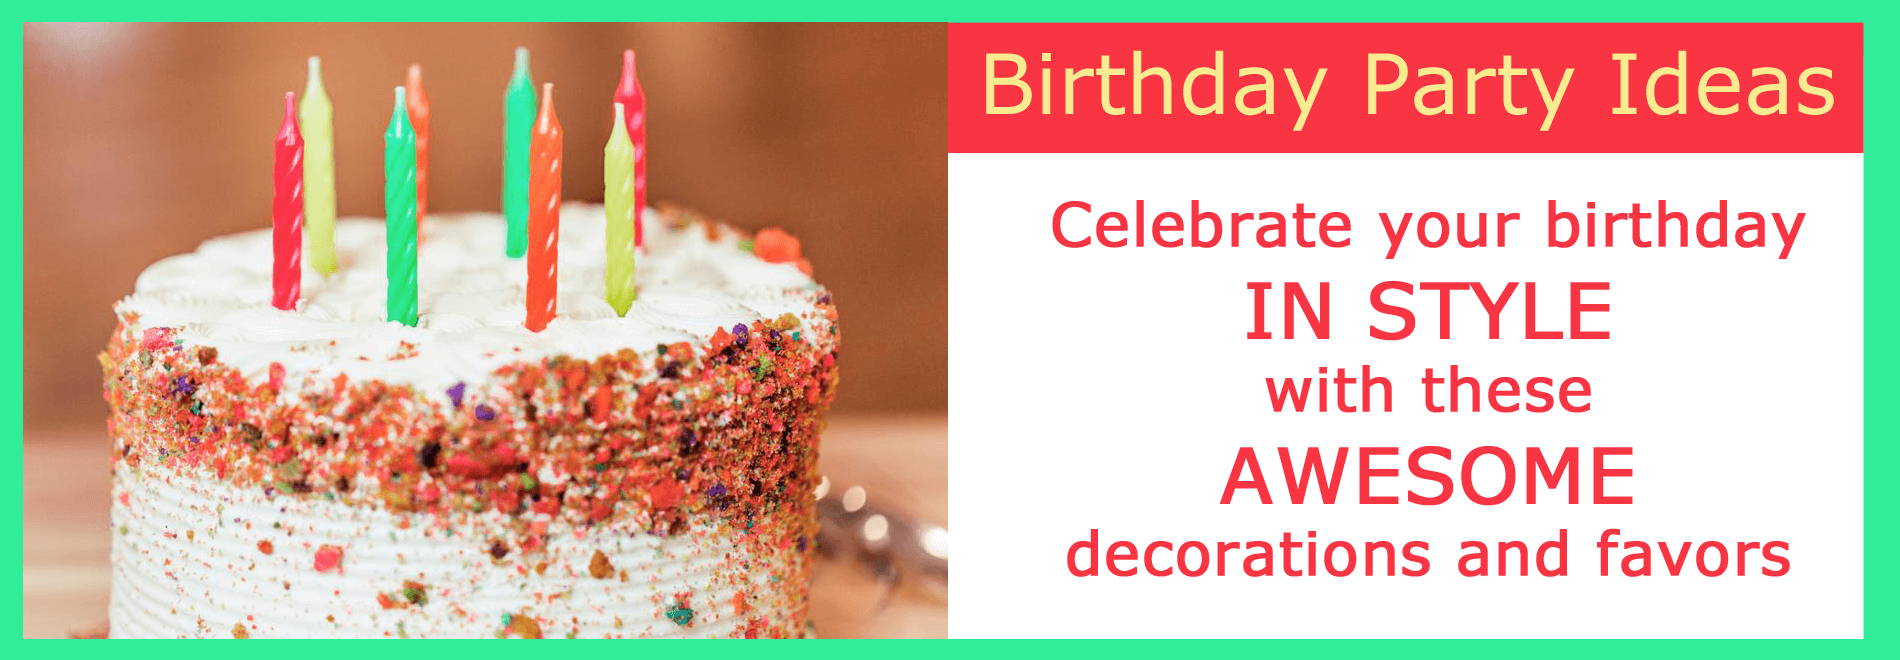 Birthday Party Printables, Decorations, and Favors